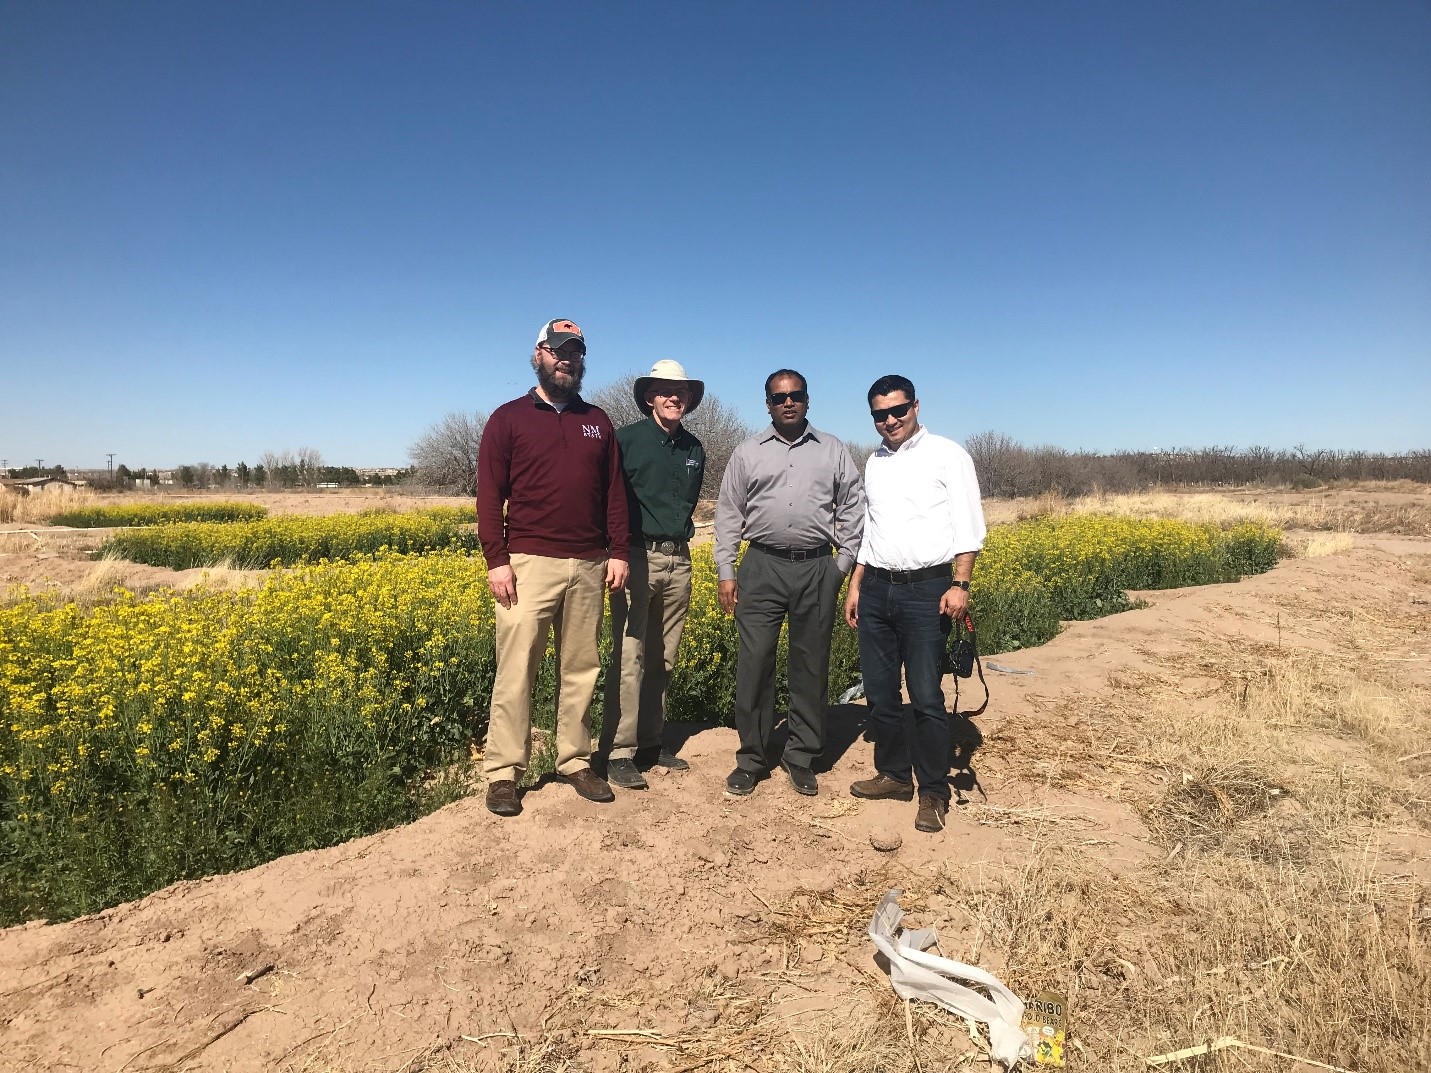 Four men are standing outside on dirt with yellow wildflowers in the background.